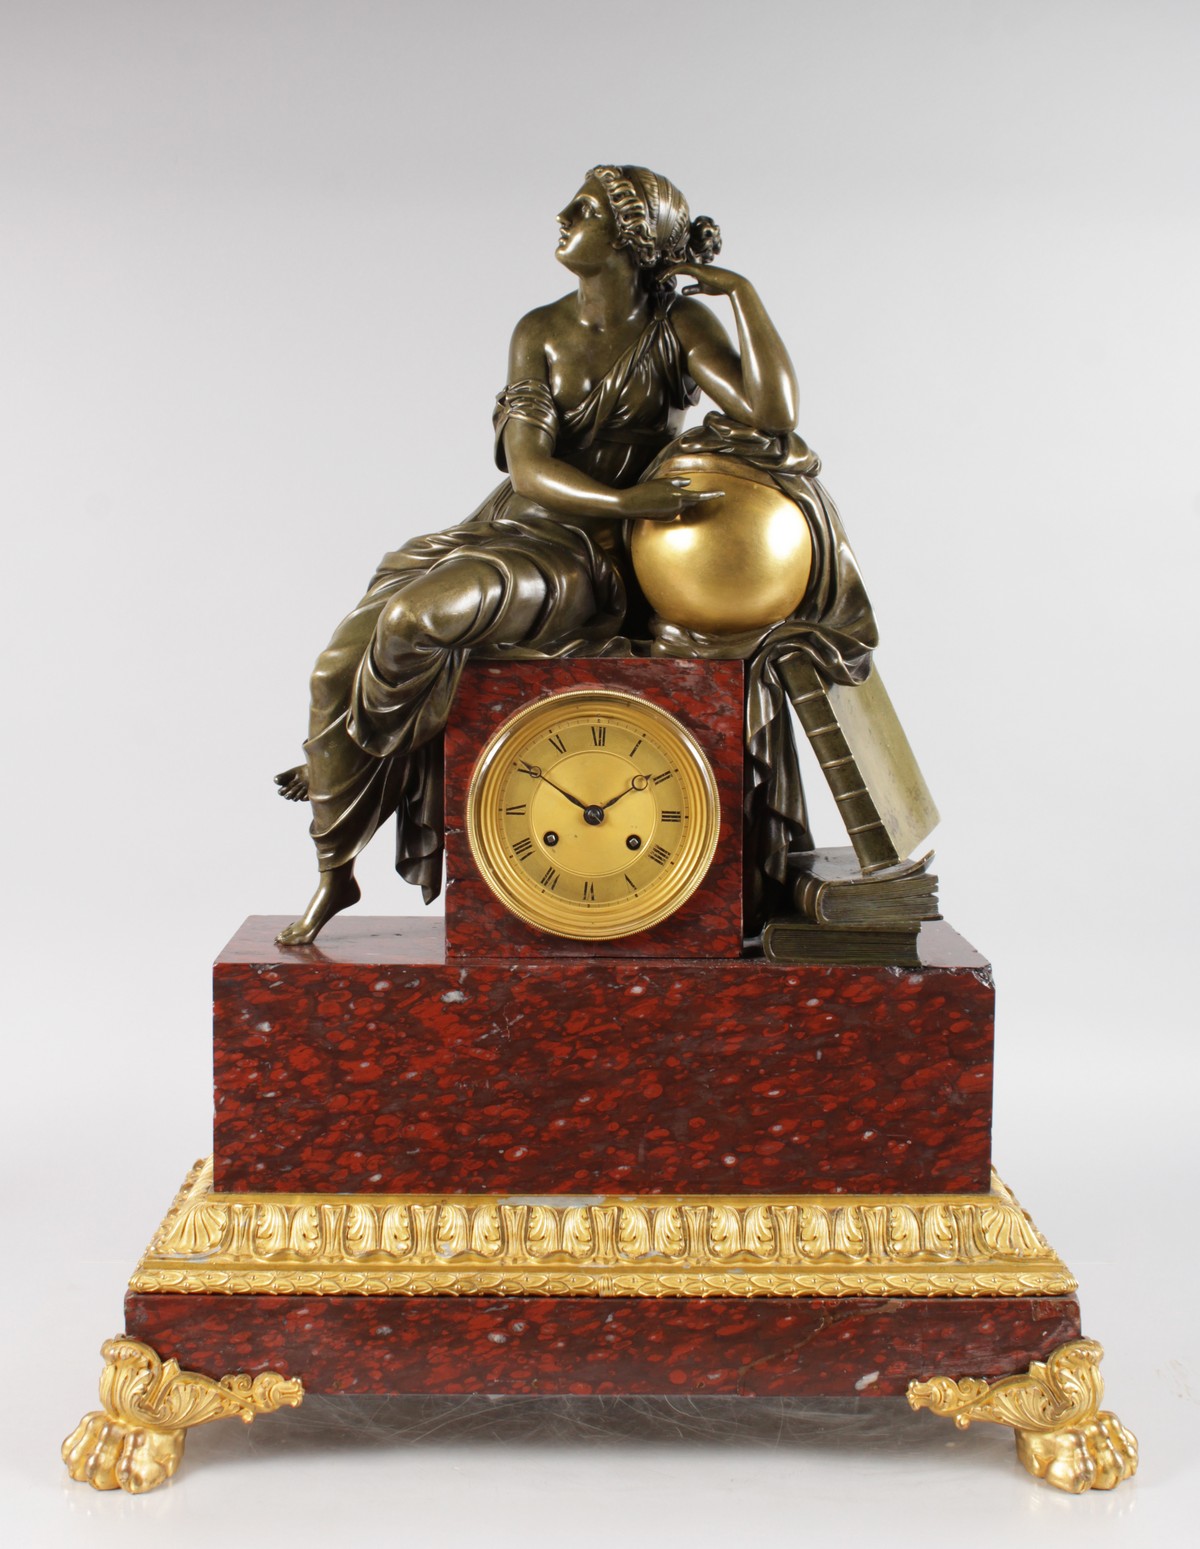 A SUPERB LOUIS XVI BRONZE, ORMOLU AND ROUGE MARBLE MANTLE CLOCK, the case with a classical female